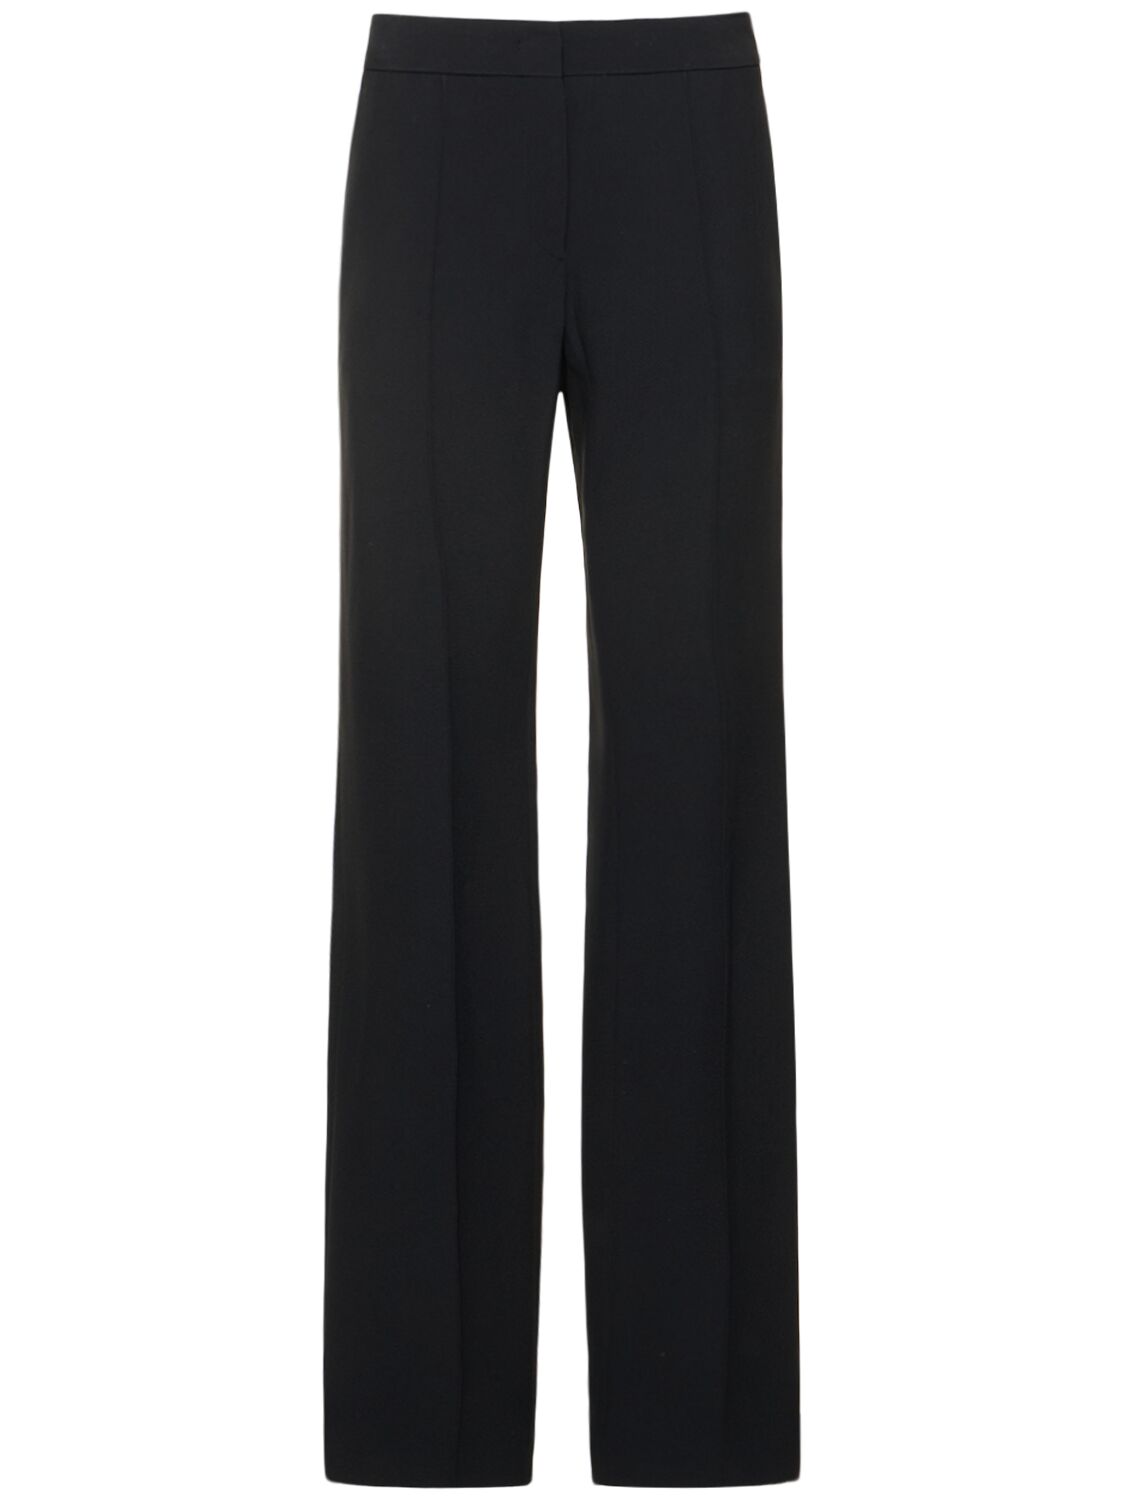 Image of Double Viscose Crepe Low Rise Pants